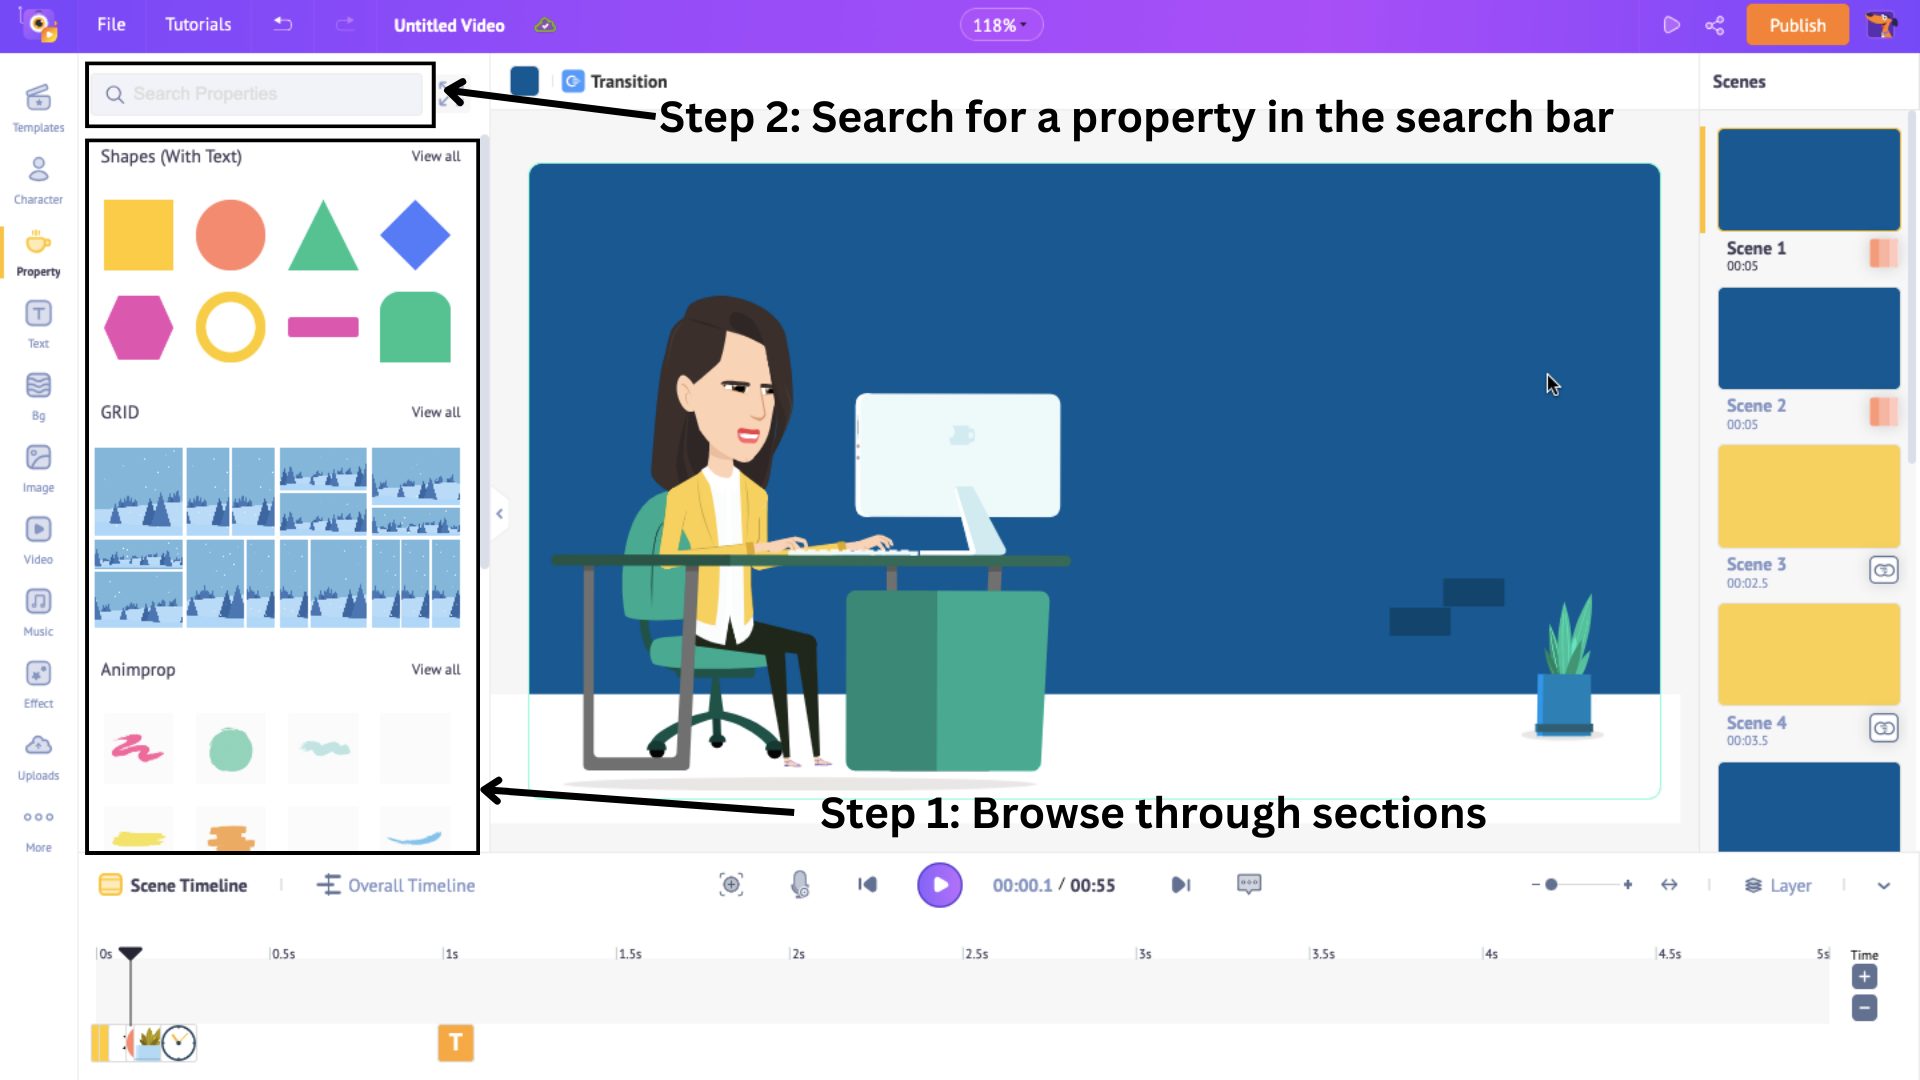 Search for a property in the search bar